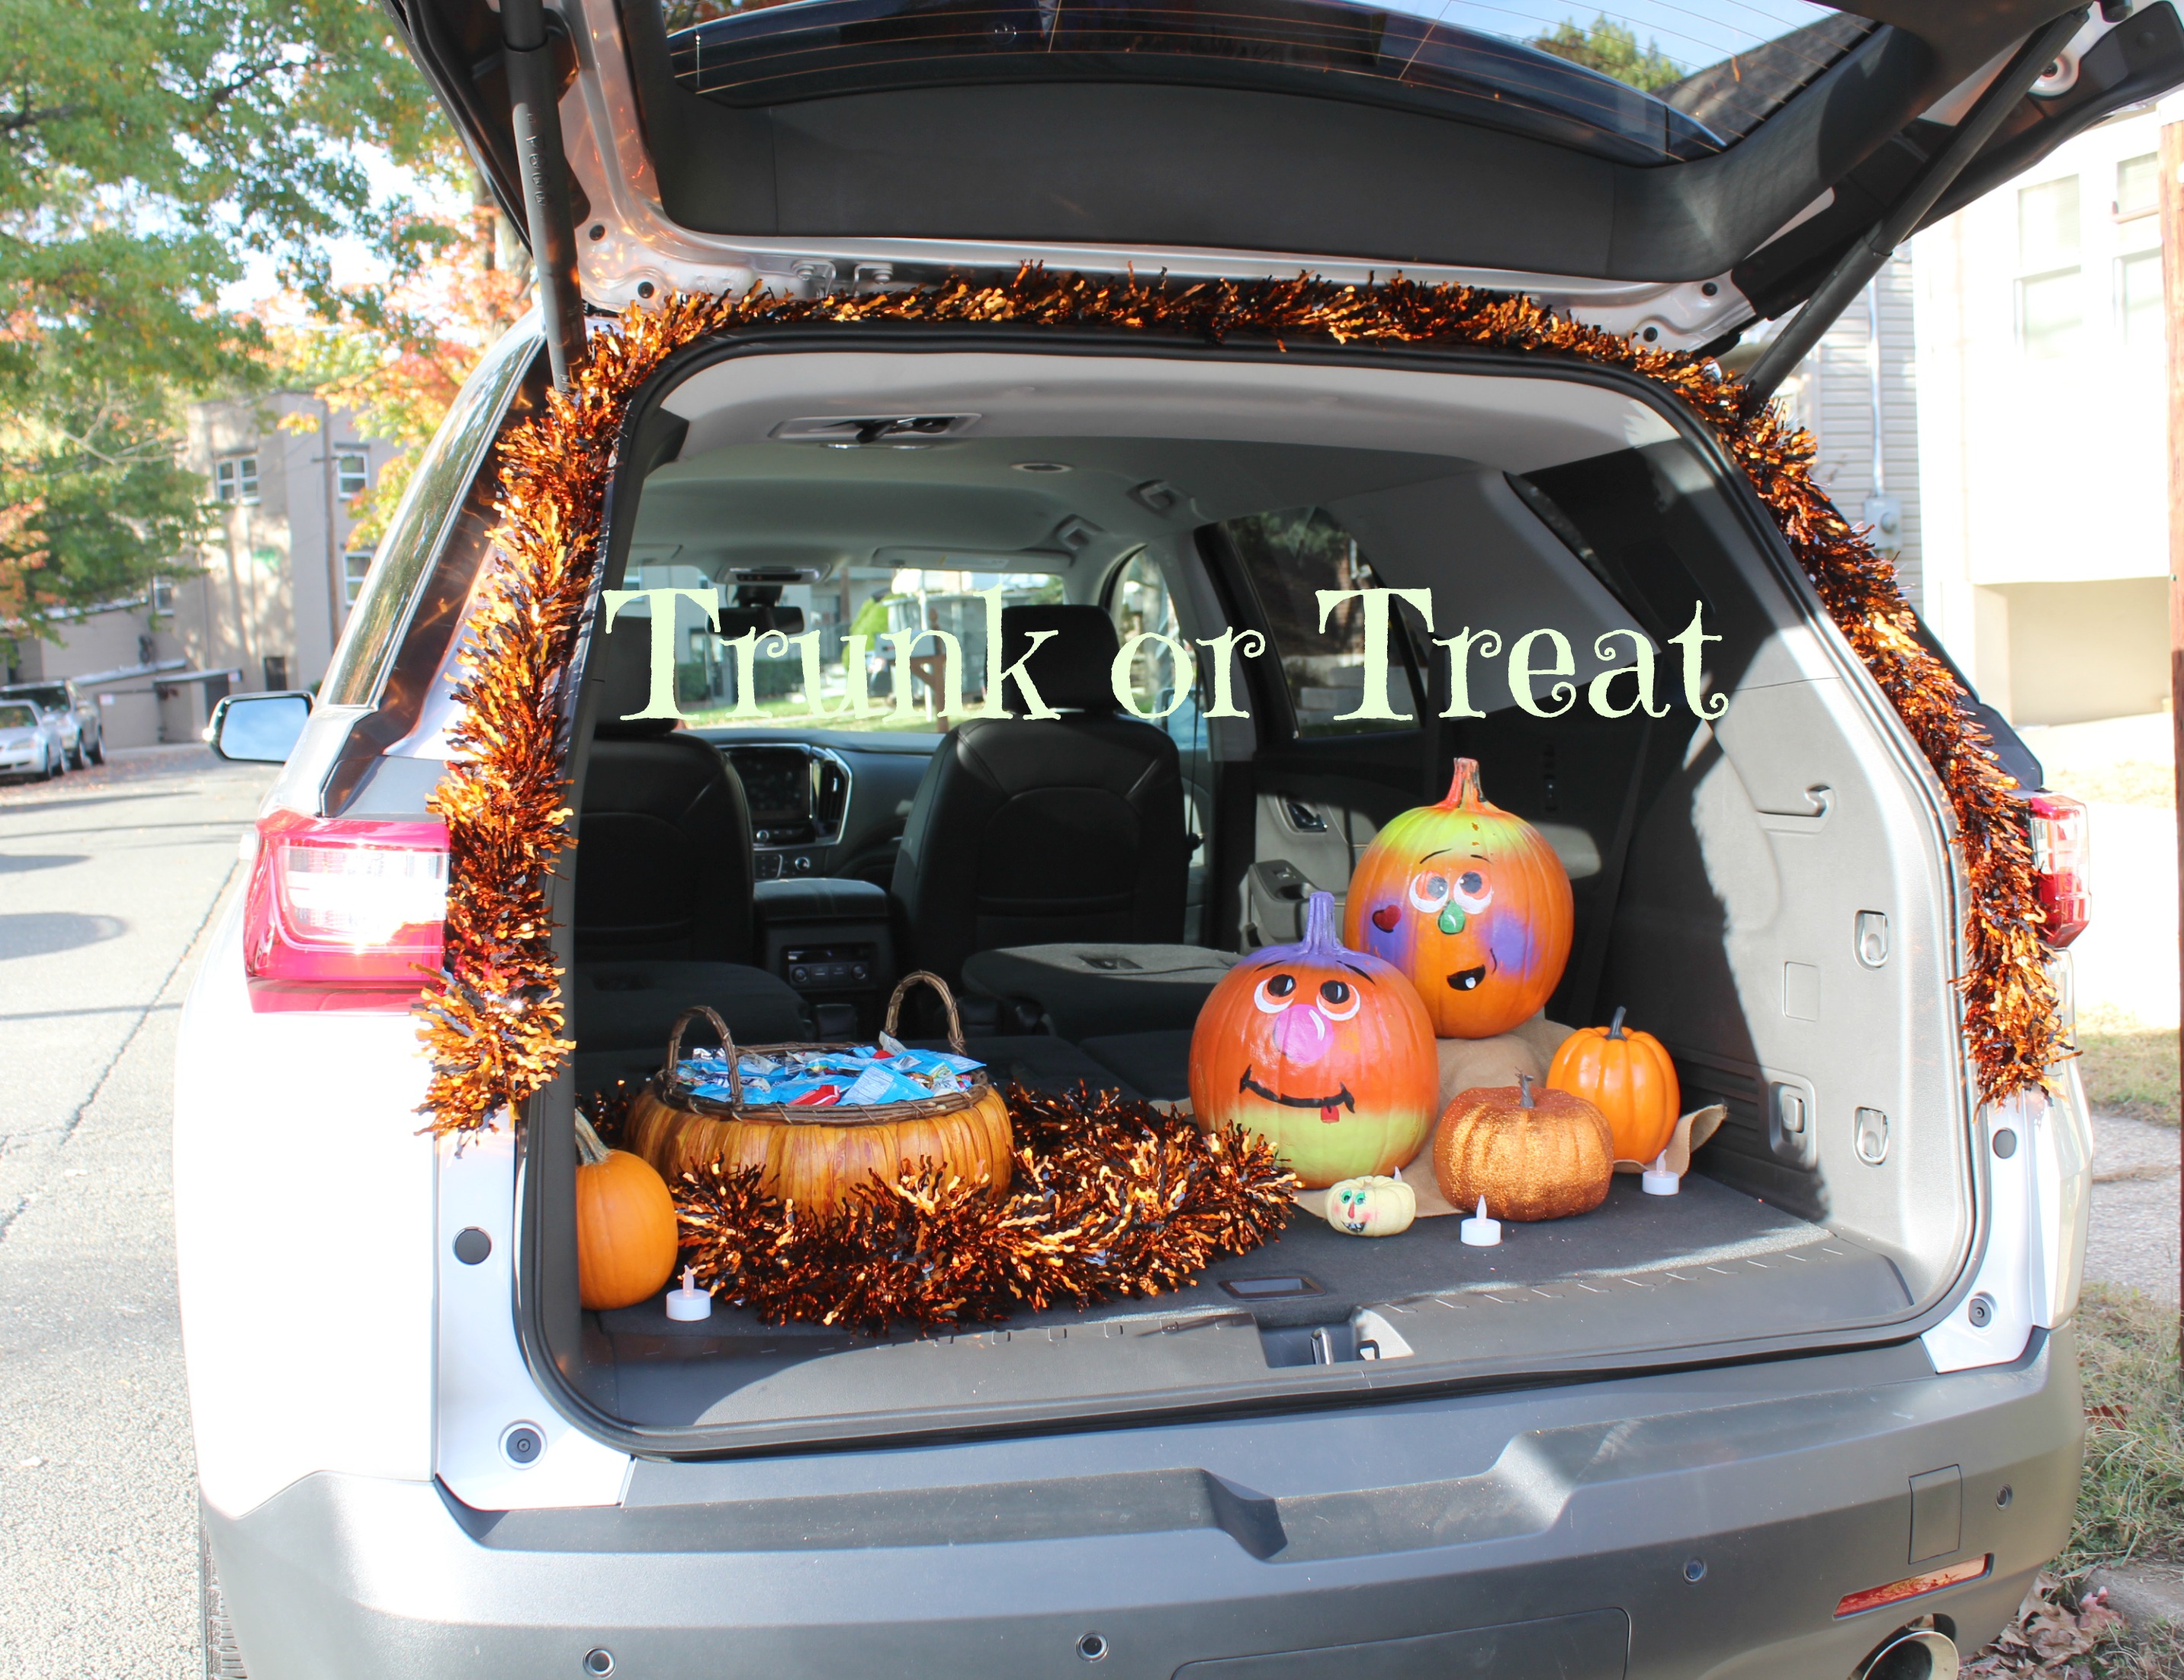 Easy Car Decorations For Trunk Or Treat - Decorating Ideas